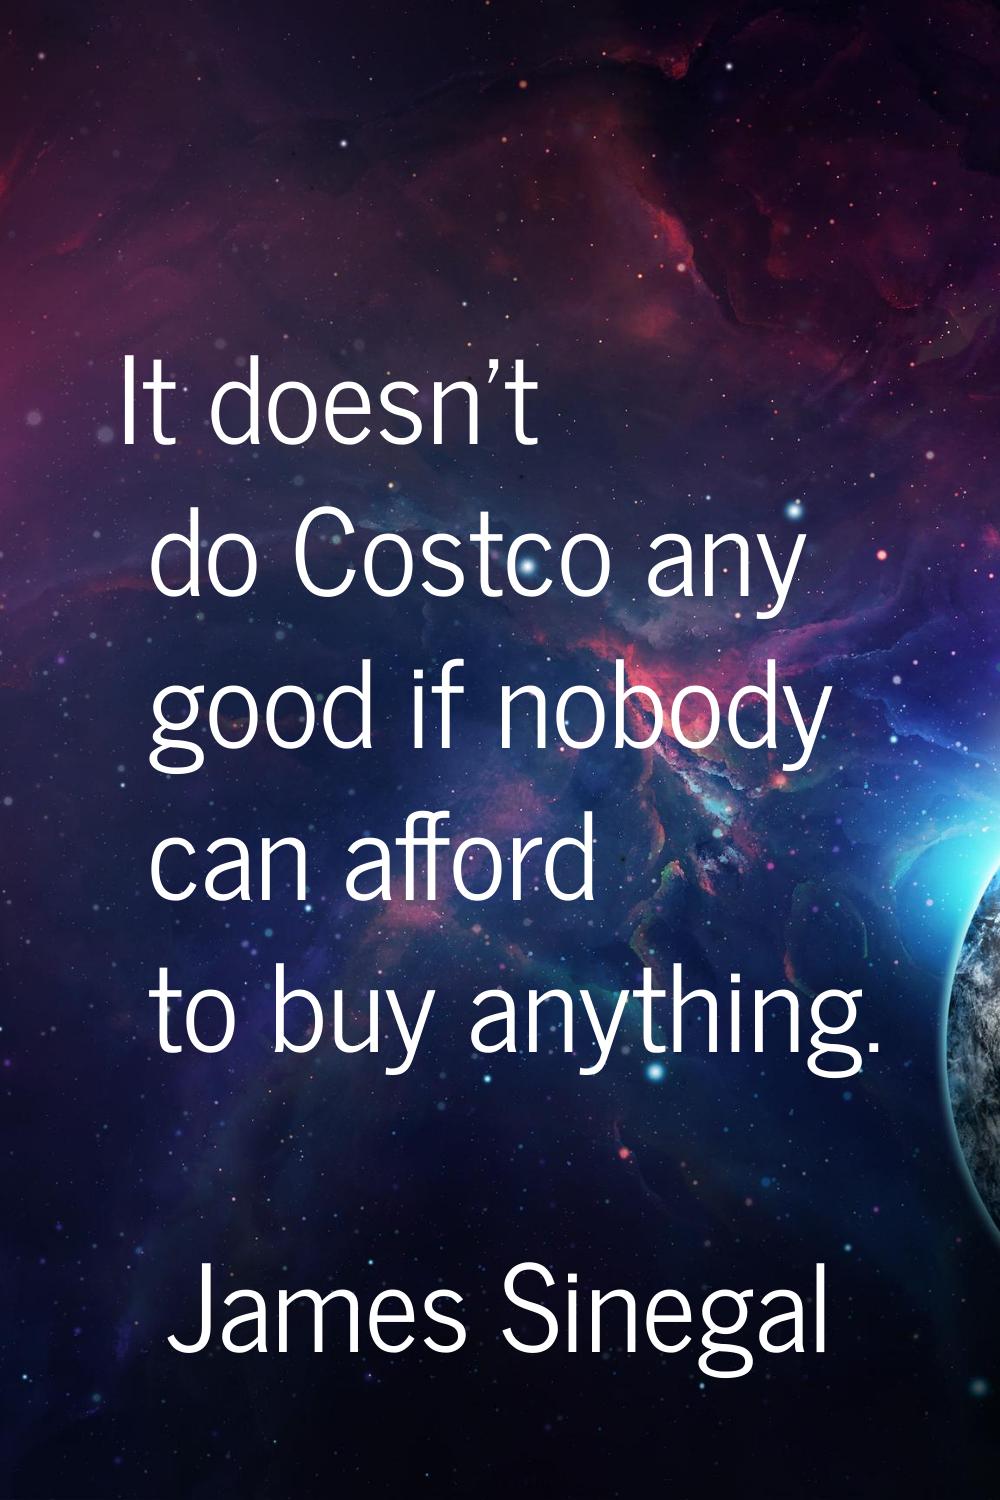 It doesn't do Costco any good if nobody can afford to buy anything.